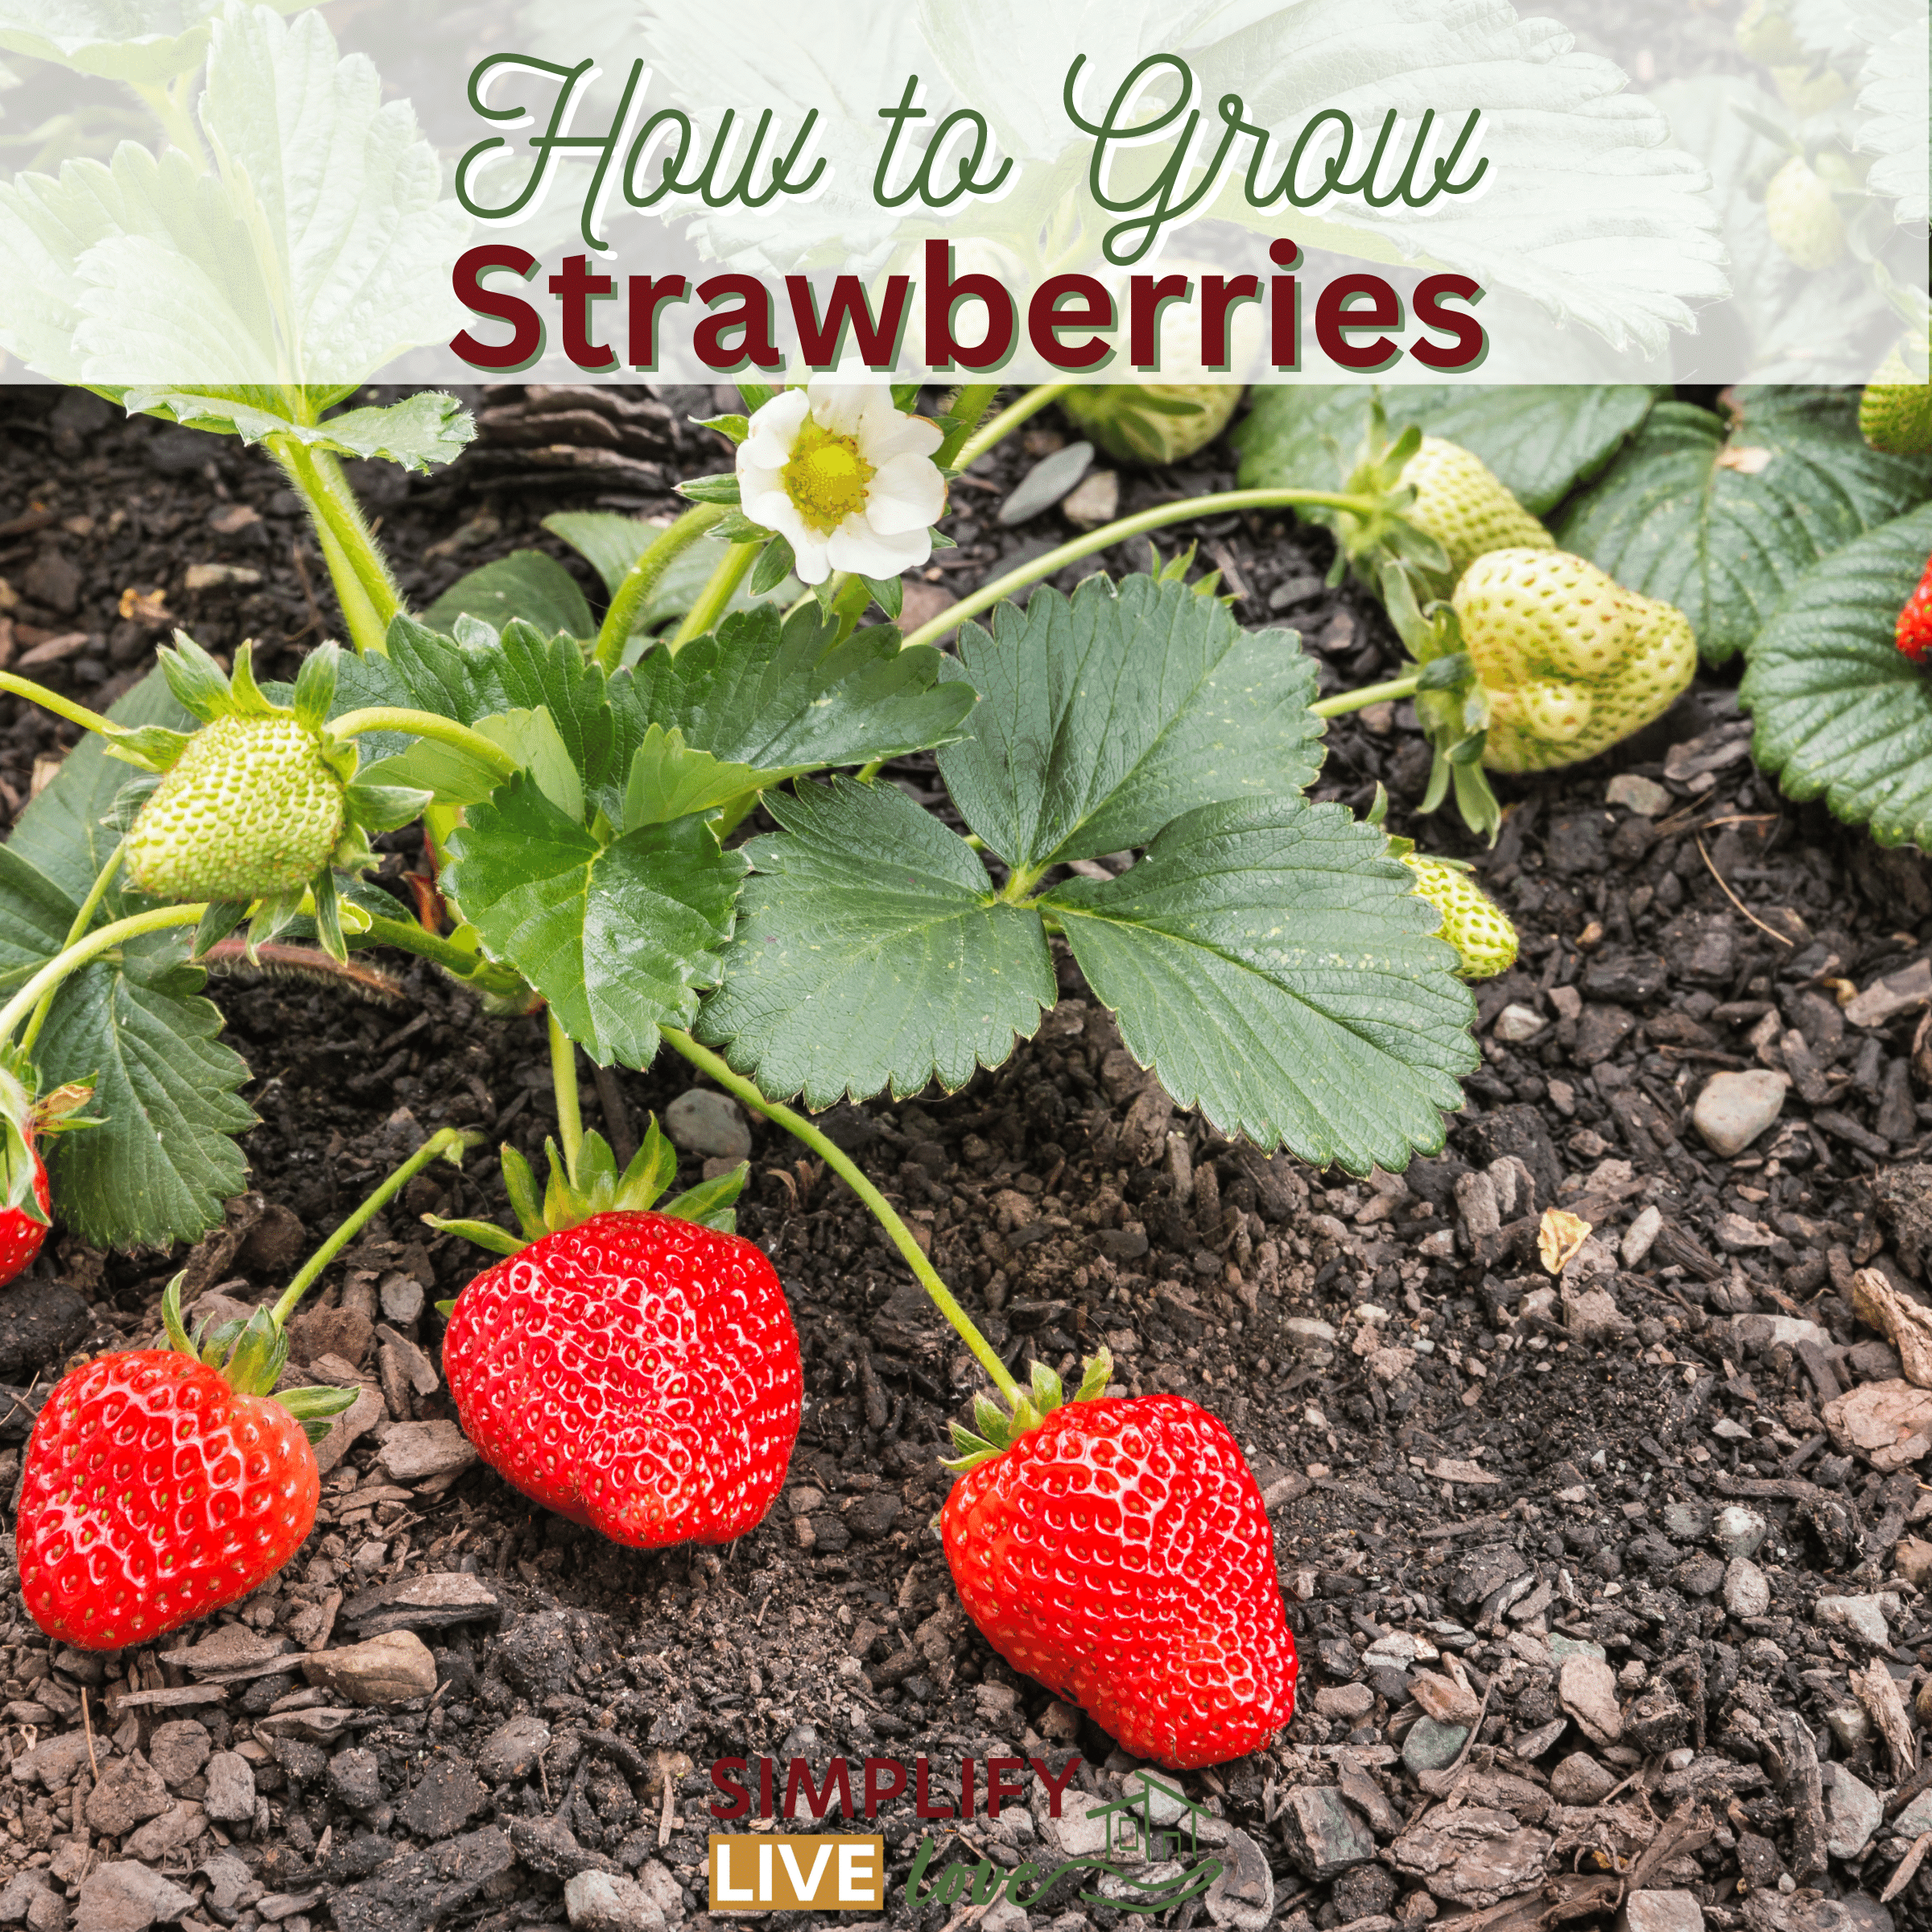 https://simplifylivelove.com/wp-content/uploads/2023/03/How-to-Grow-Strawberries-1200x1200-1.png